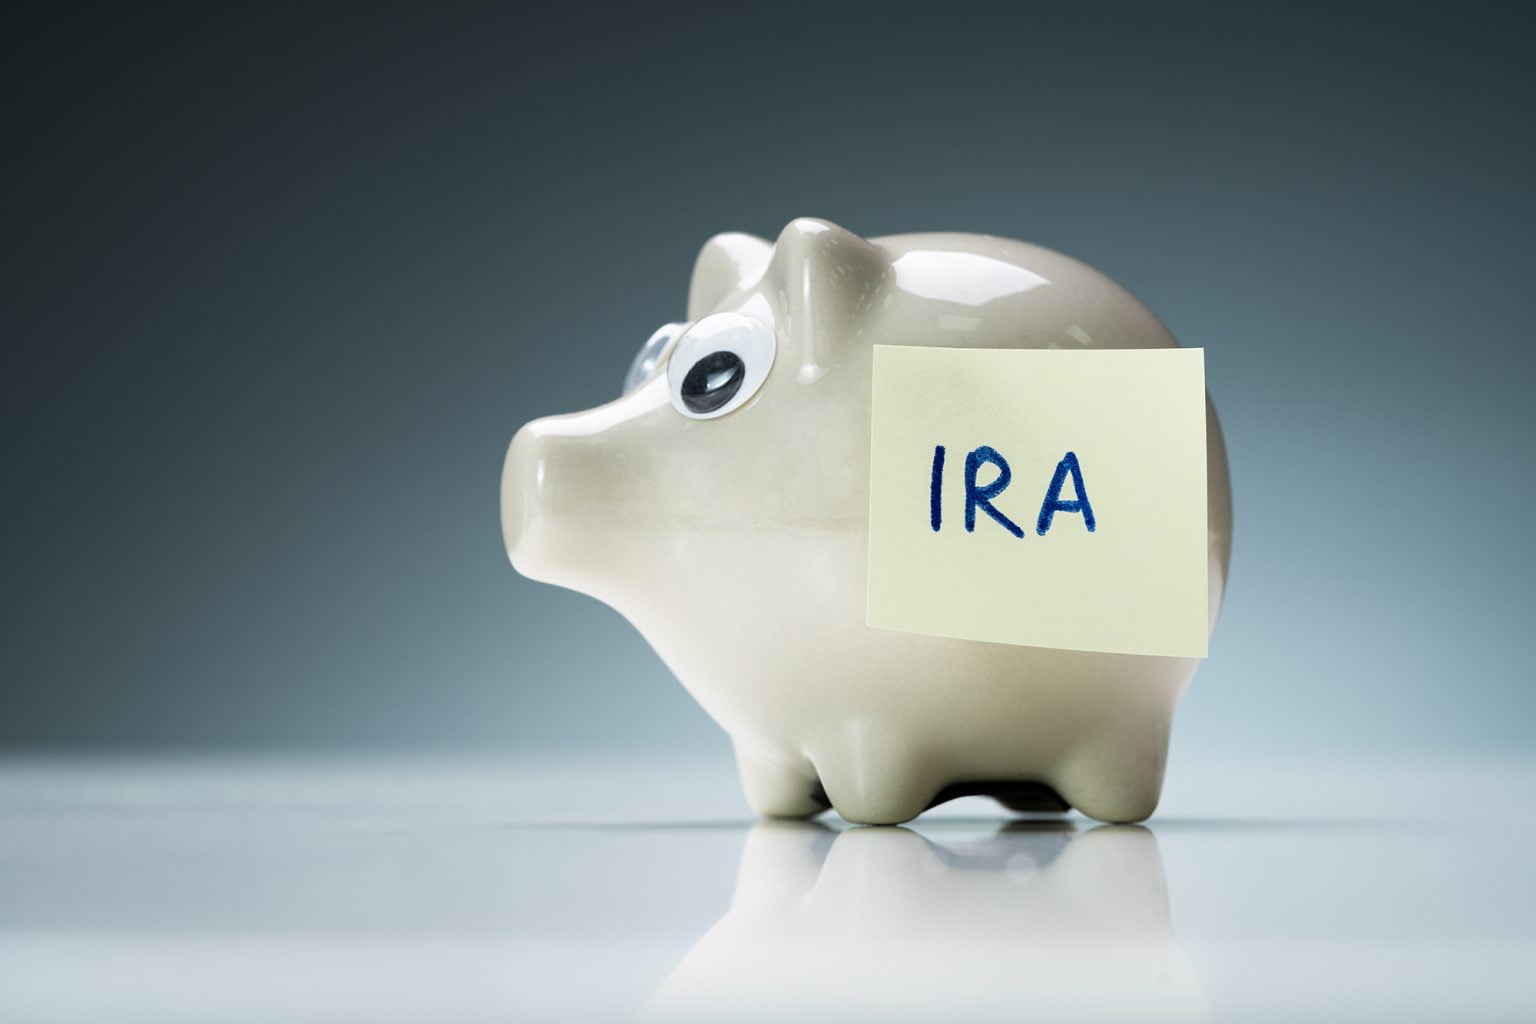 Piggy Bank on a Desk with a Post-It that says IRA